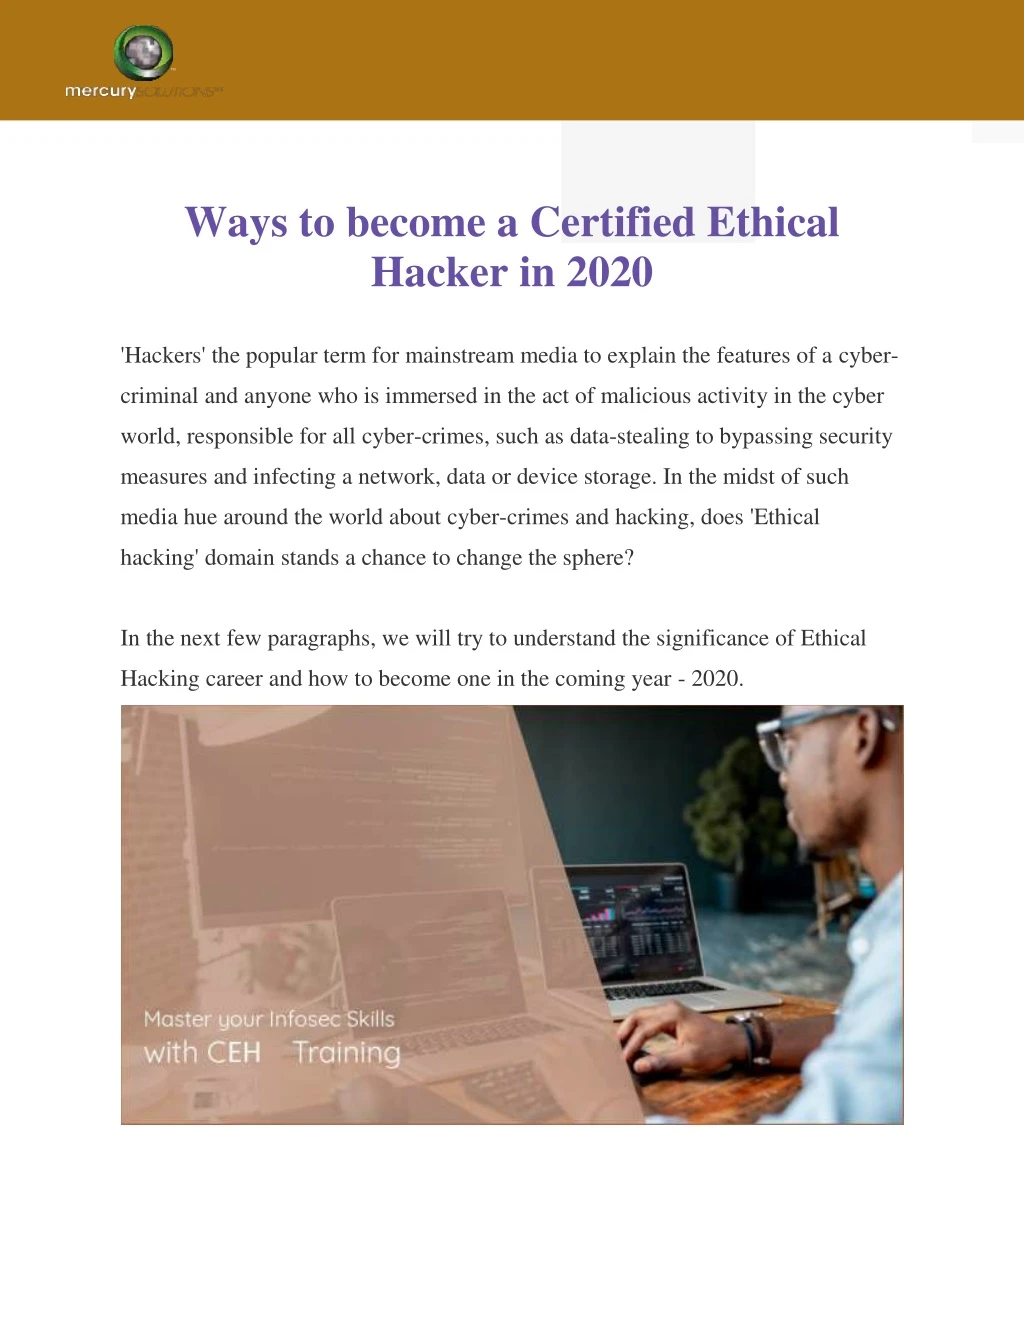 ways to become a certified ethical hacker in 2020